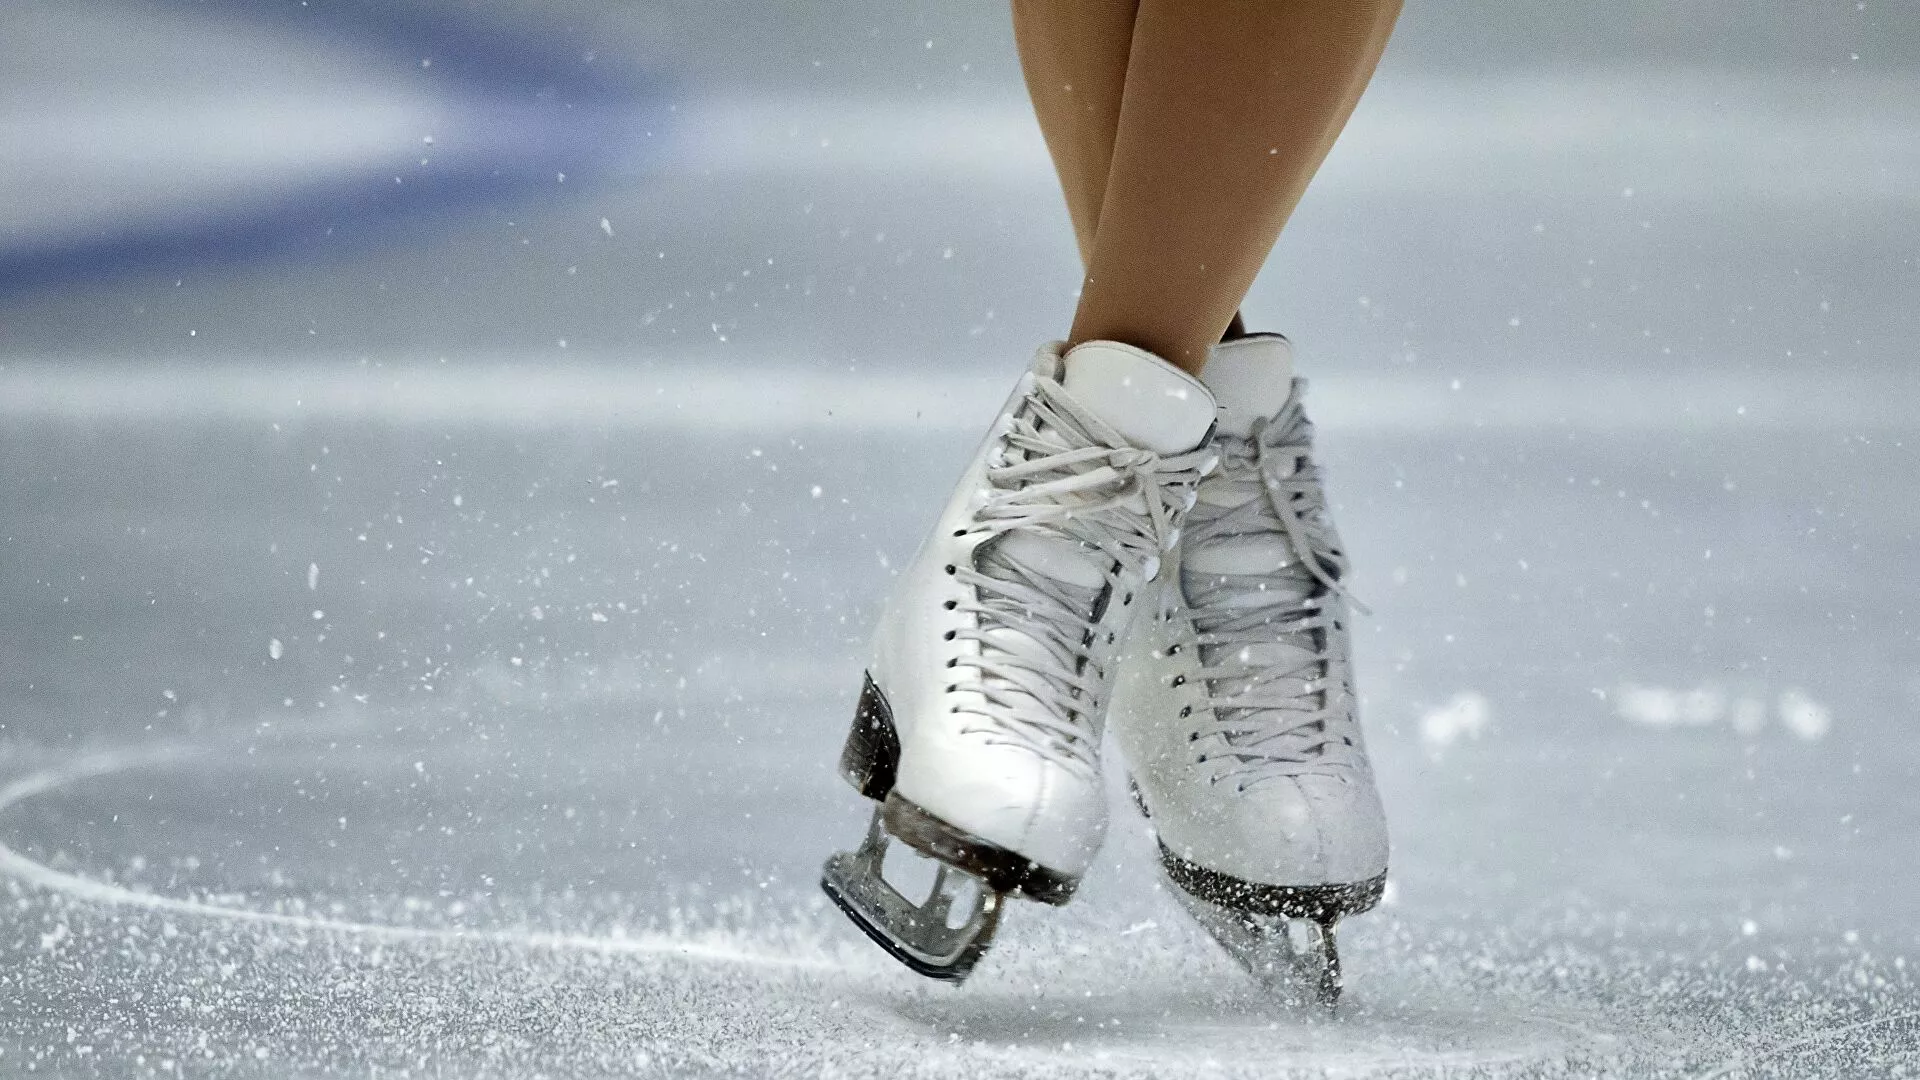 Sky Rink at Chelsea Piers in USA, North America | Skating - Rated 0.8